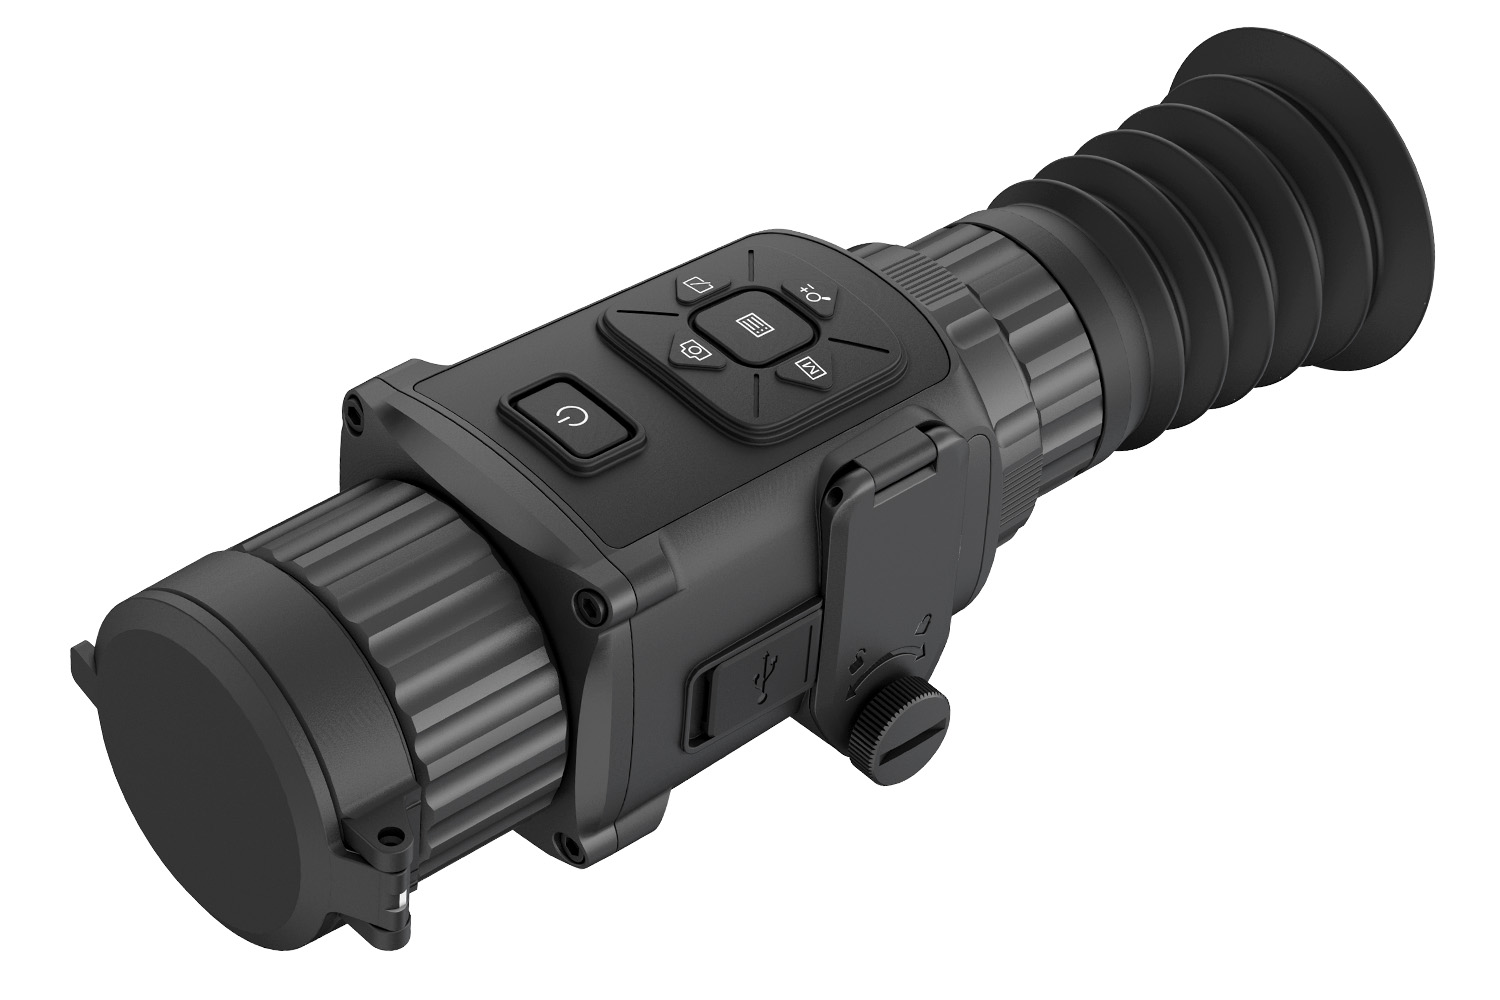 AGM Global Vision 3092455004TH21 Rattler TS25-384 Thermal Hand Held/Mountable Scope Black Matte 1.5x 25mm Red Crosshair Reticle Digital 1x/2x/4x/8x/PIP Zoom 384x288, 50Hz Resolution